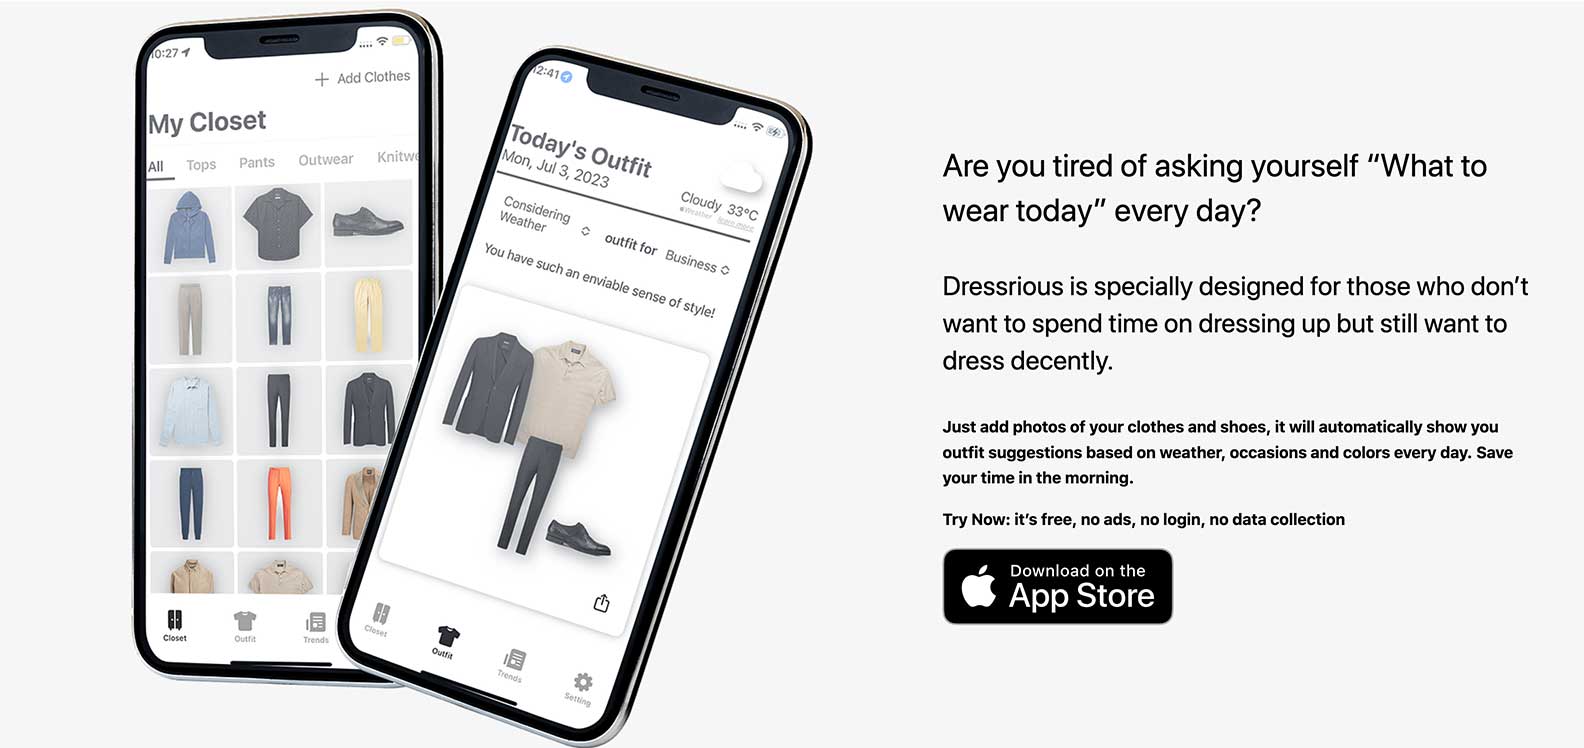 Dressrious AI Tool Review Pricing and Alternative 2023